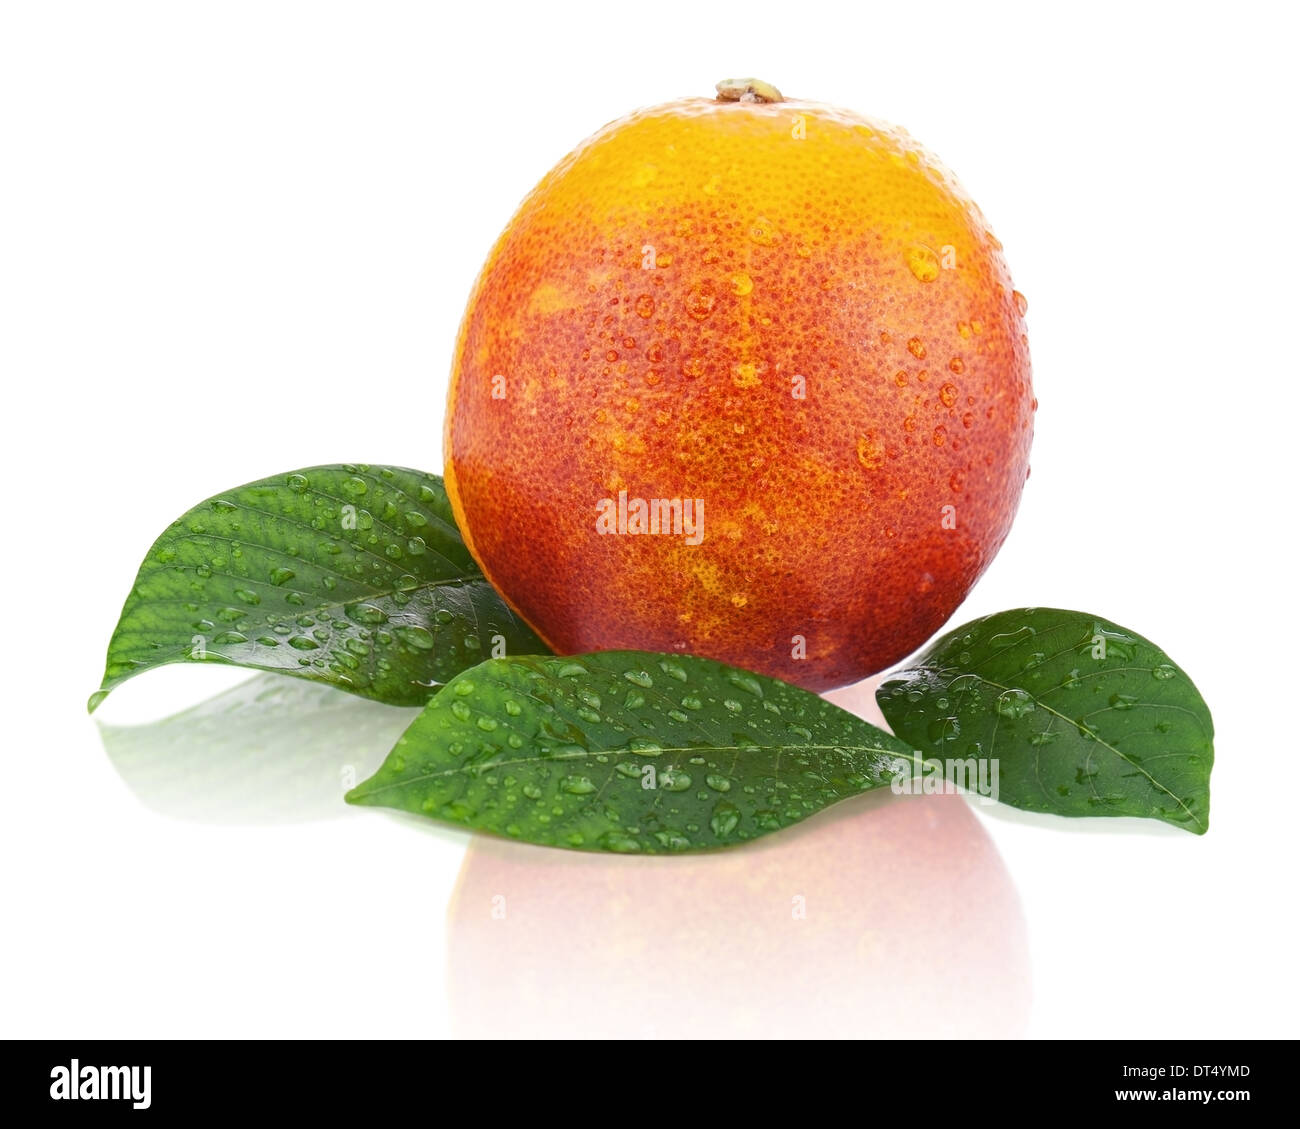 Blood orange with green leaves isolated on white background. Closeup. Stock Photo